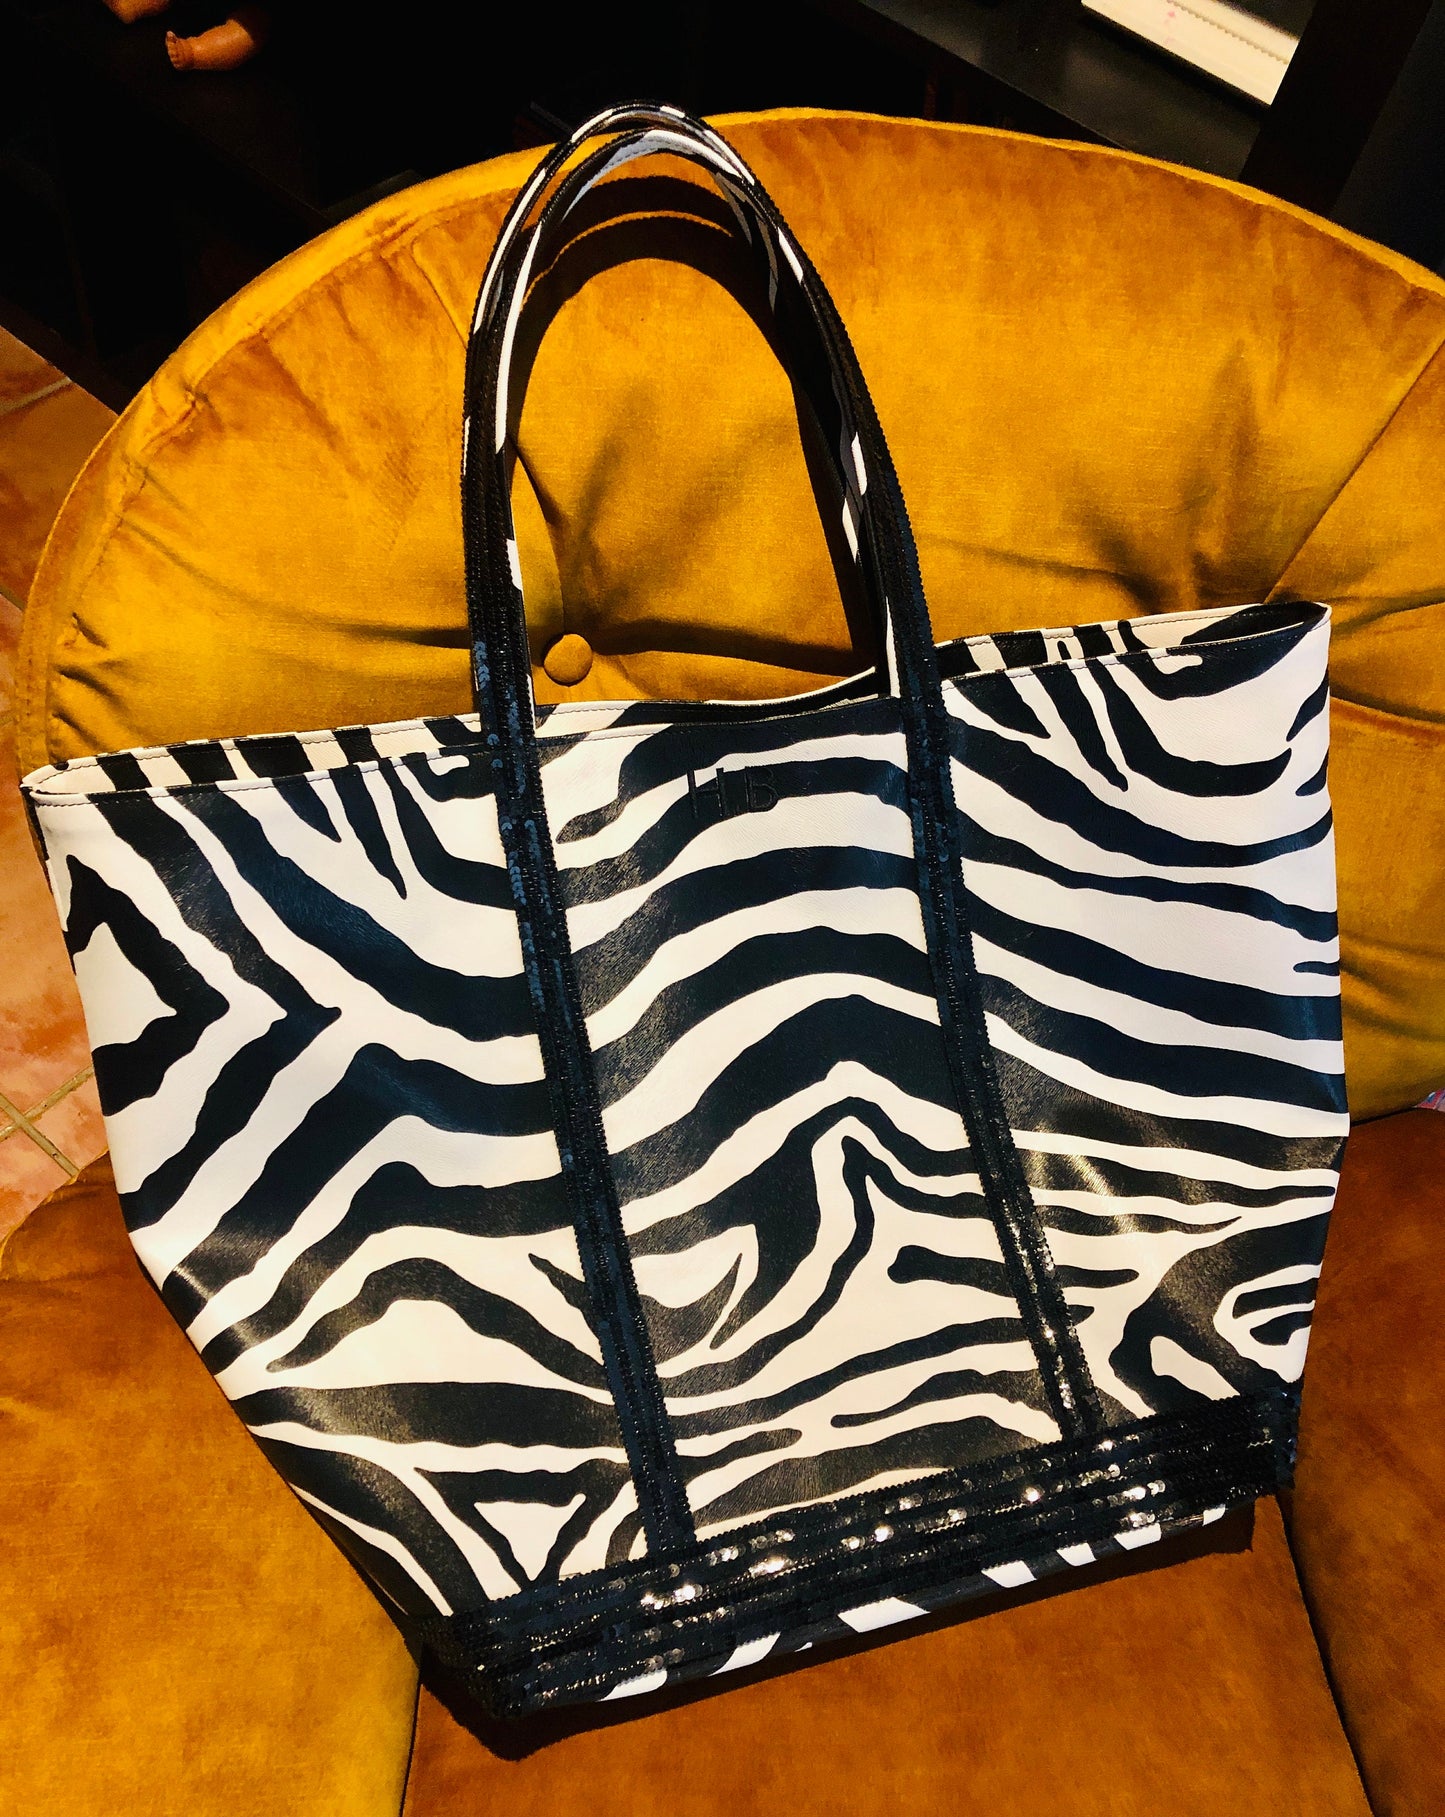 Faux leather zebra tote bag with black sequins